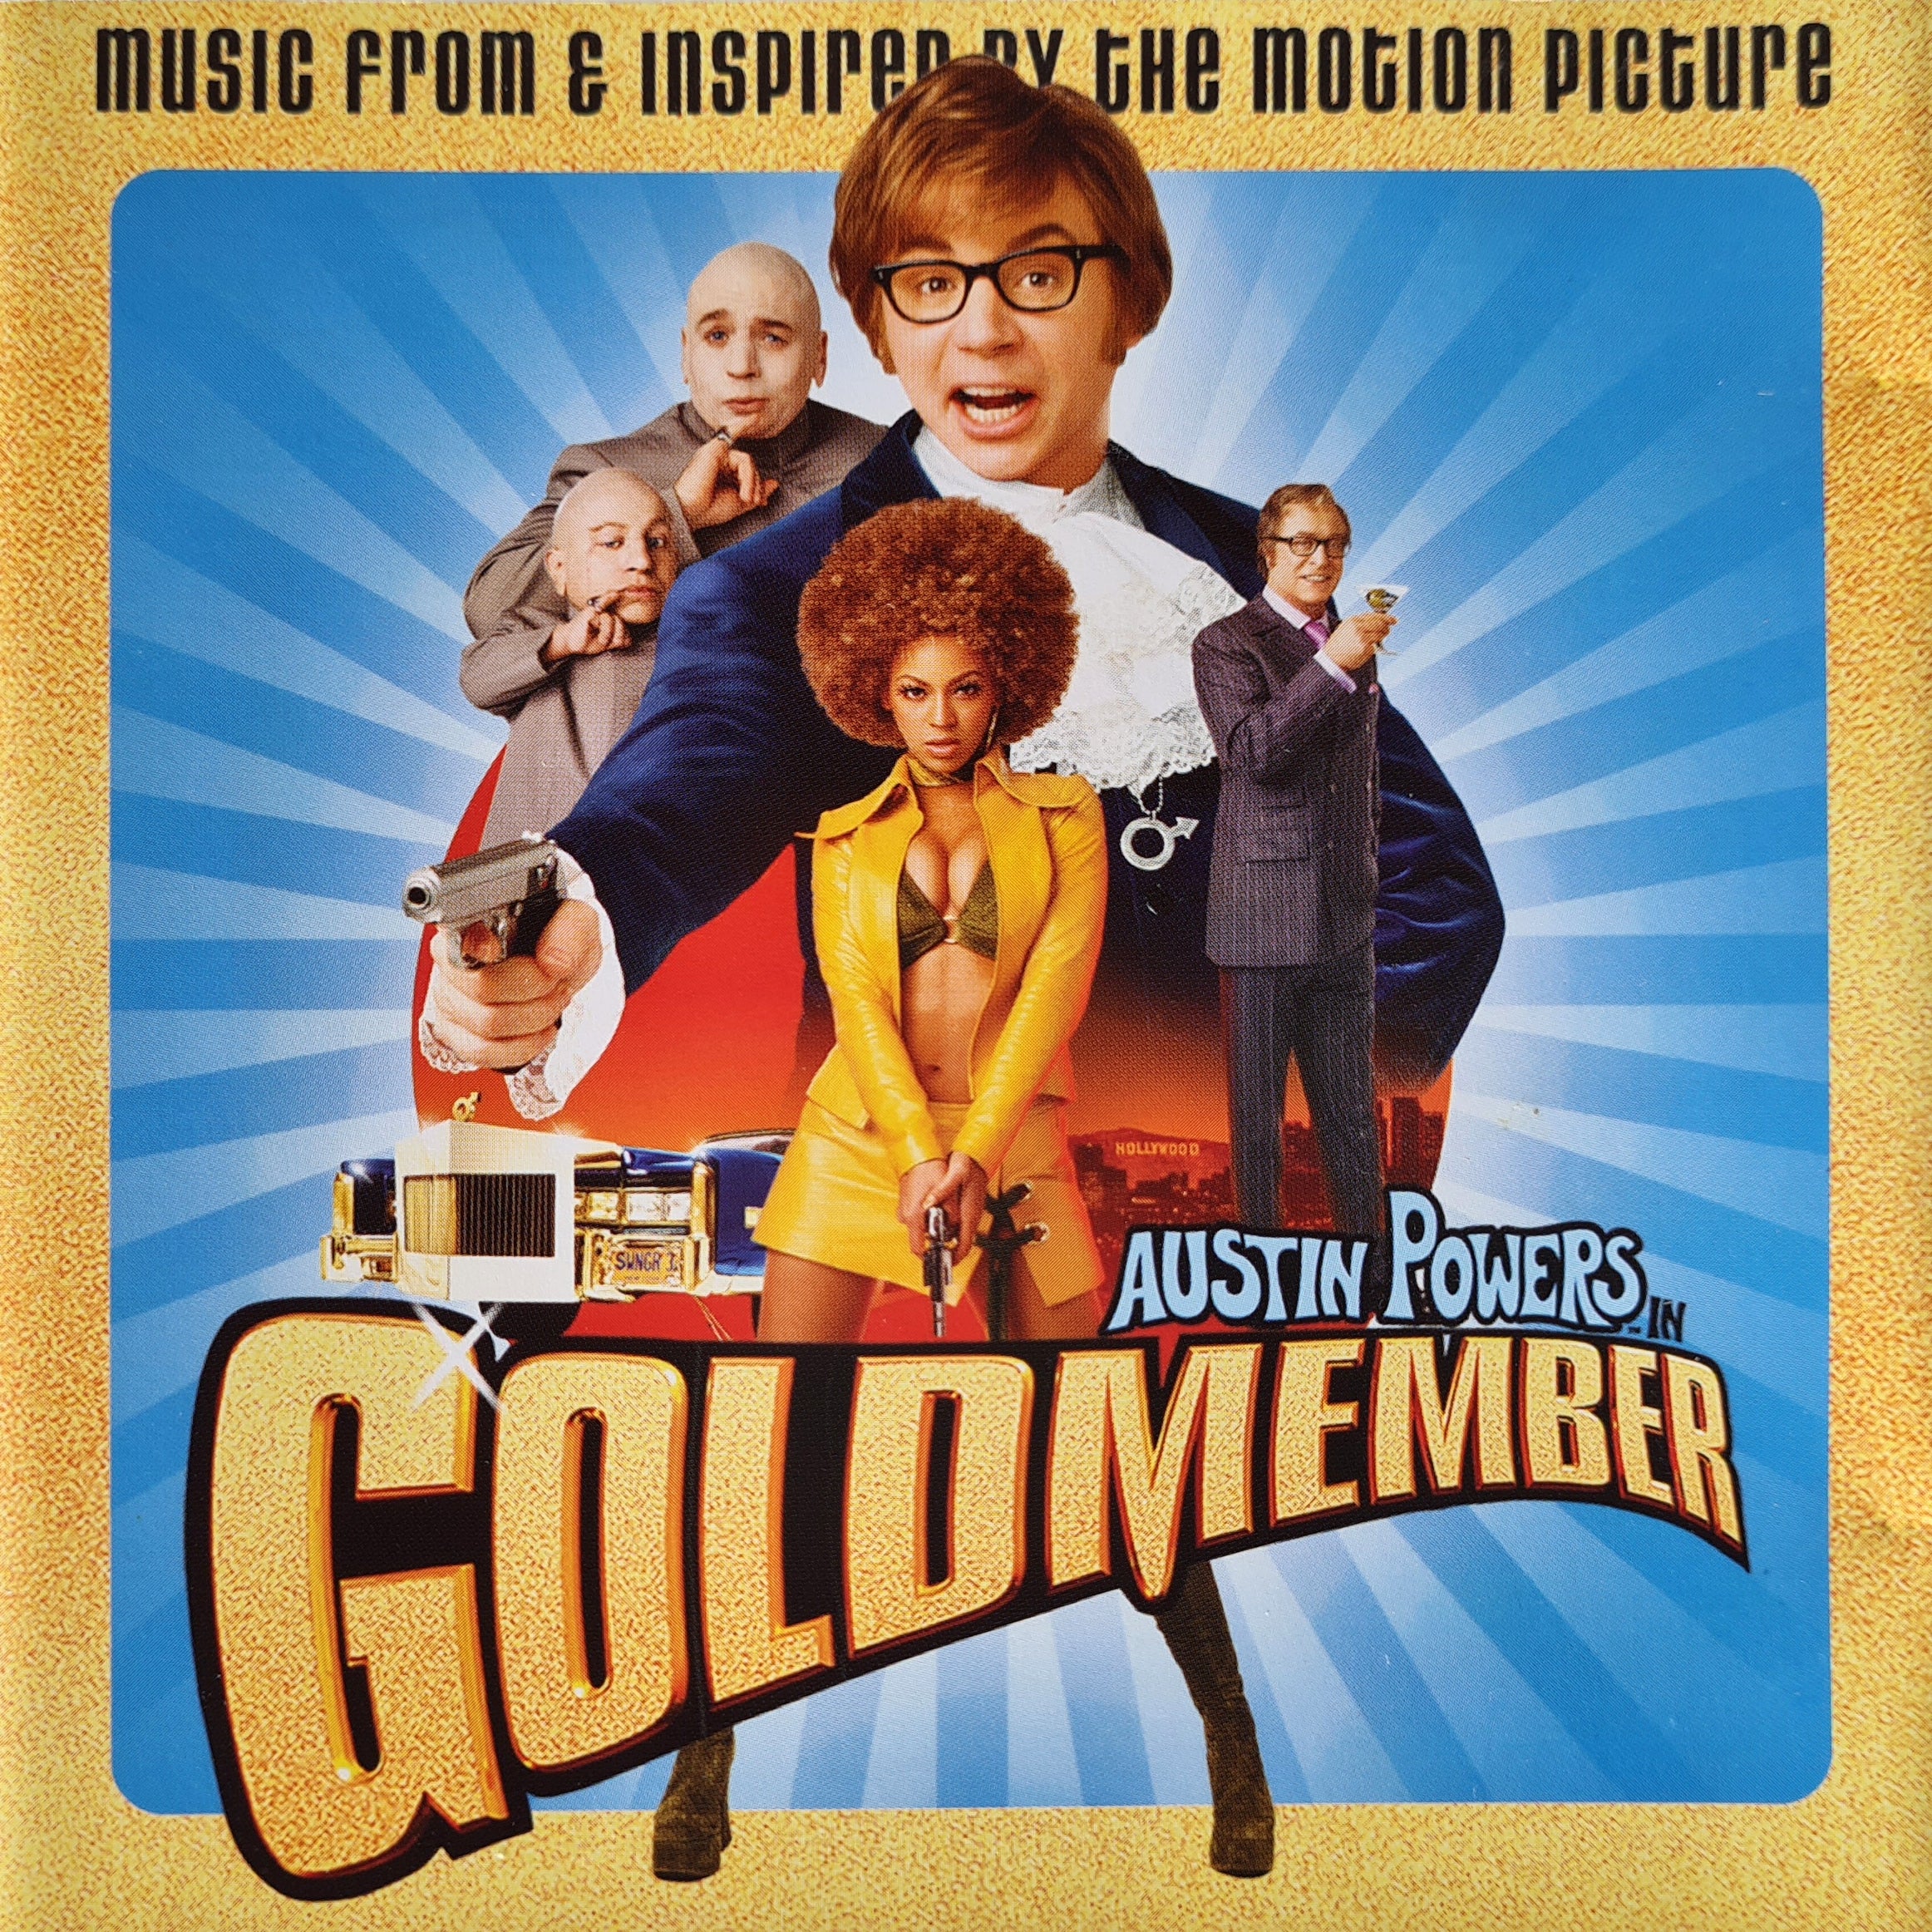 Austin Powers in Goldmember - Music from the Motion Picture (CD)